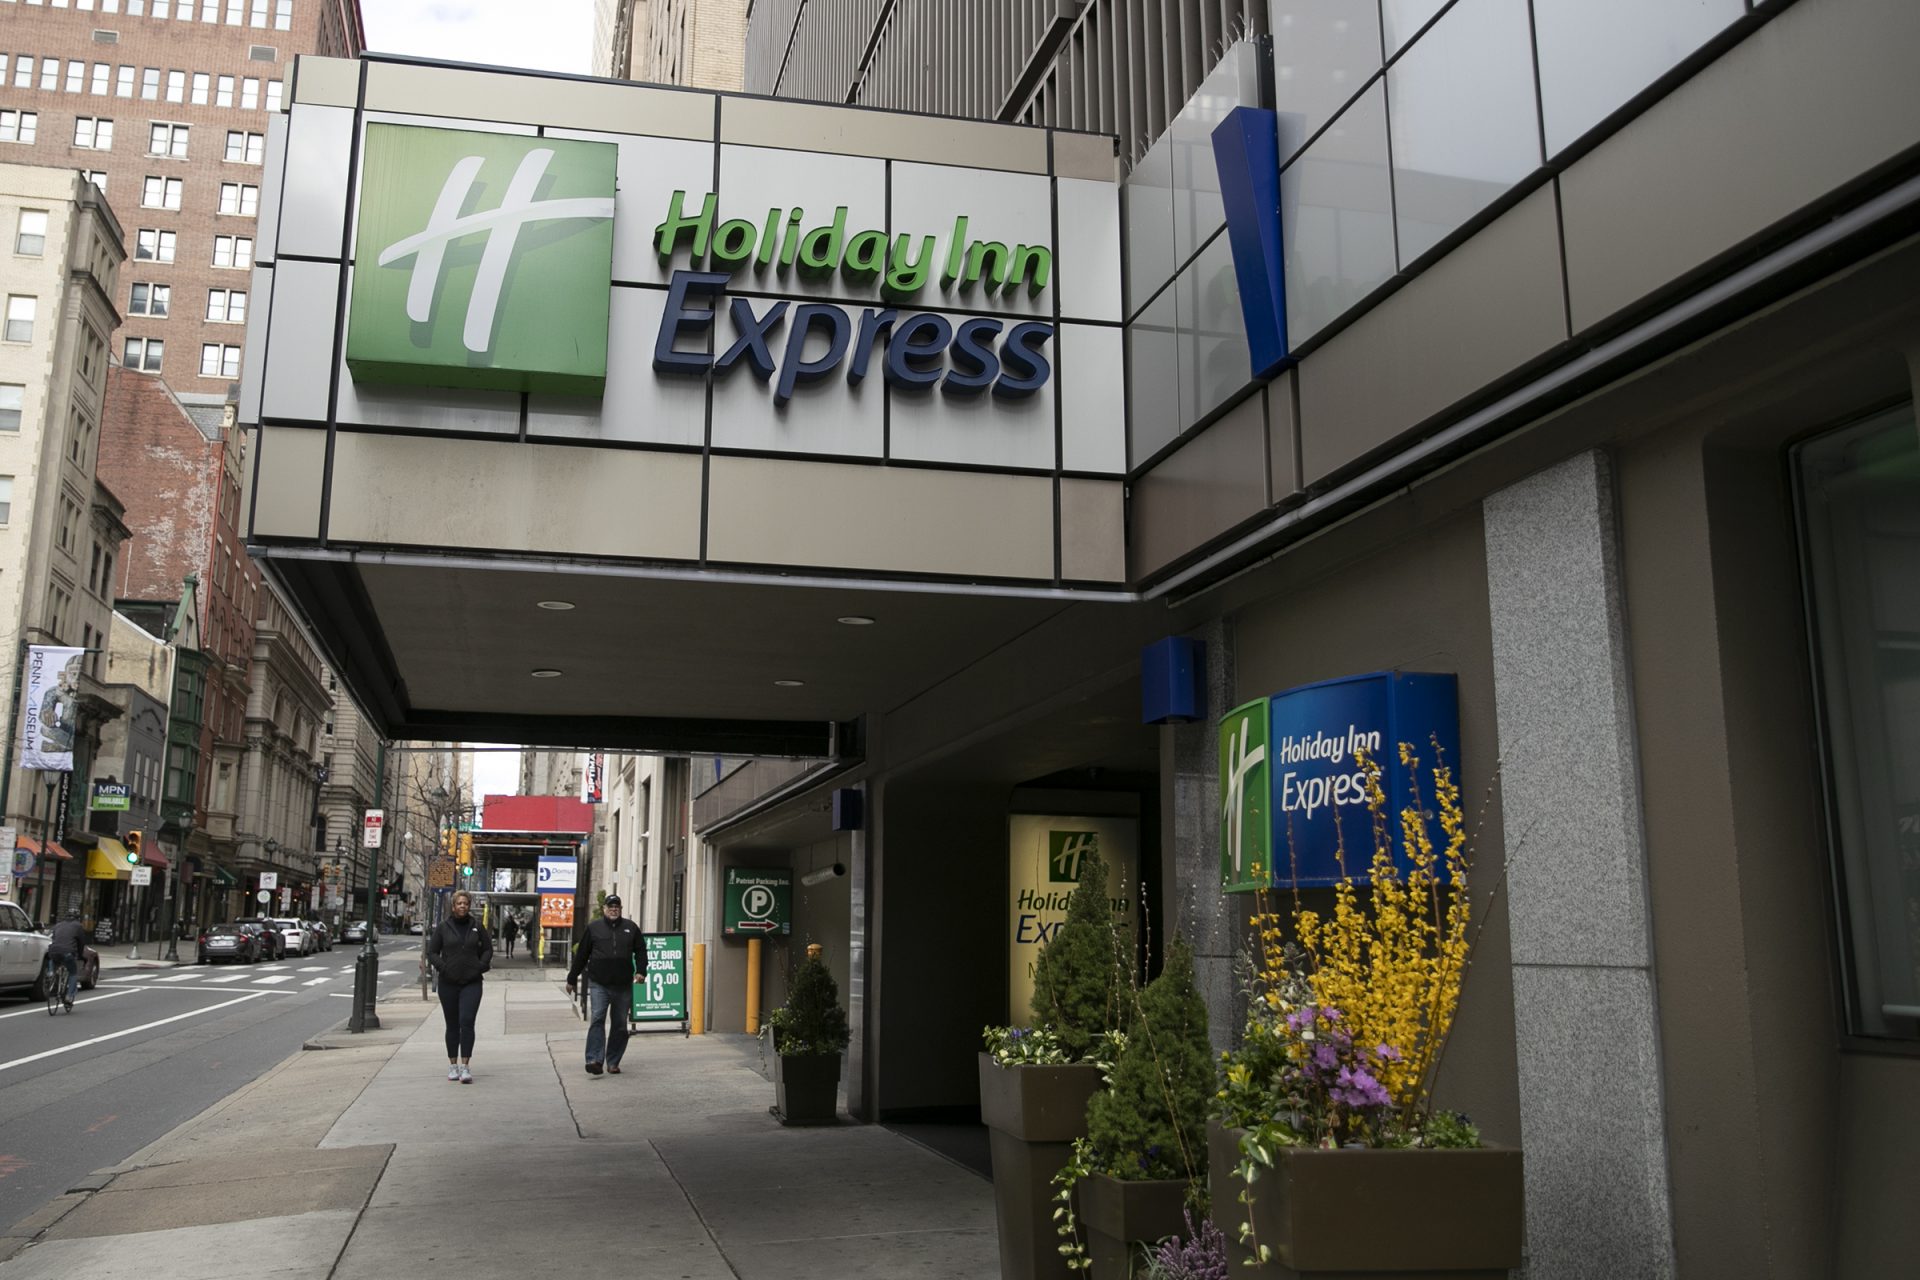 The Holiday Inn Express at 13th and Walnut in Center City is photographed on Tuesday, March 24, 2020. The city is planning to turn the hotel into Philadelphia’s first coronavirus quarantine site, and use it to house homeless people who test positive for the virus, according to two people with knowledge of the plans.